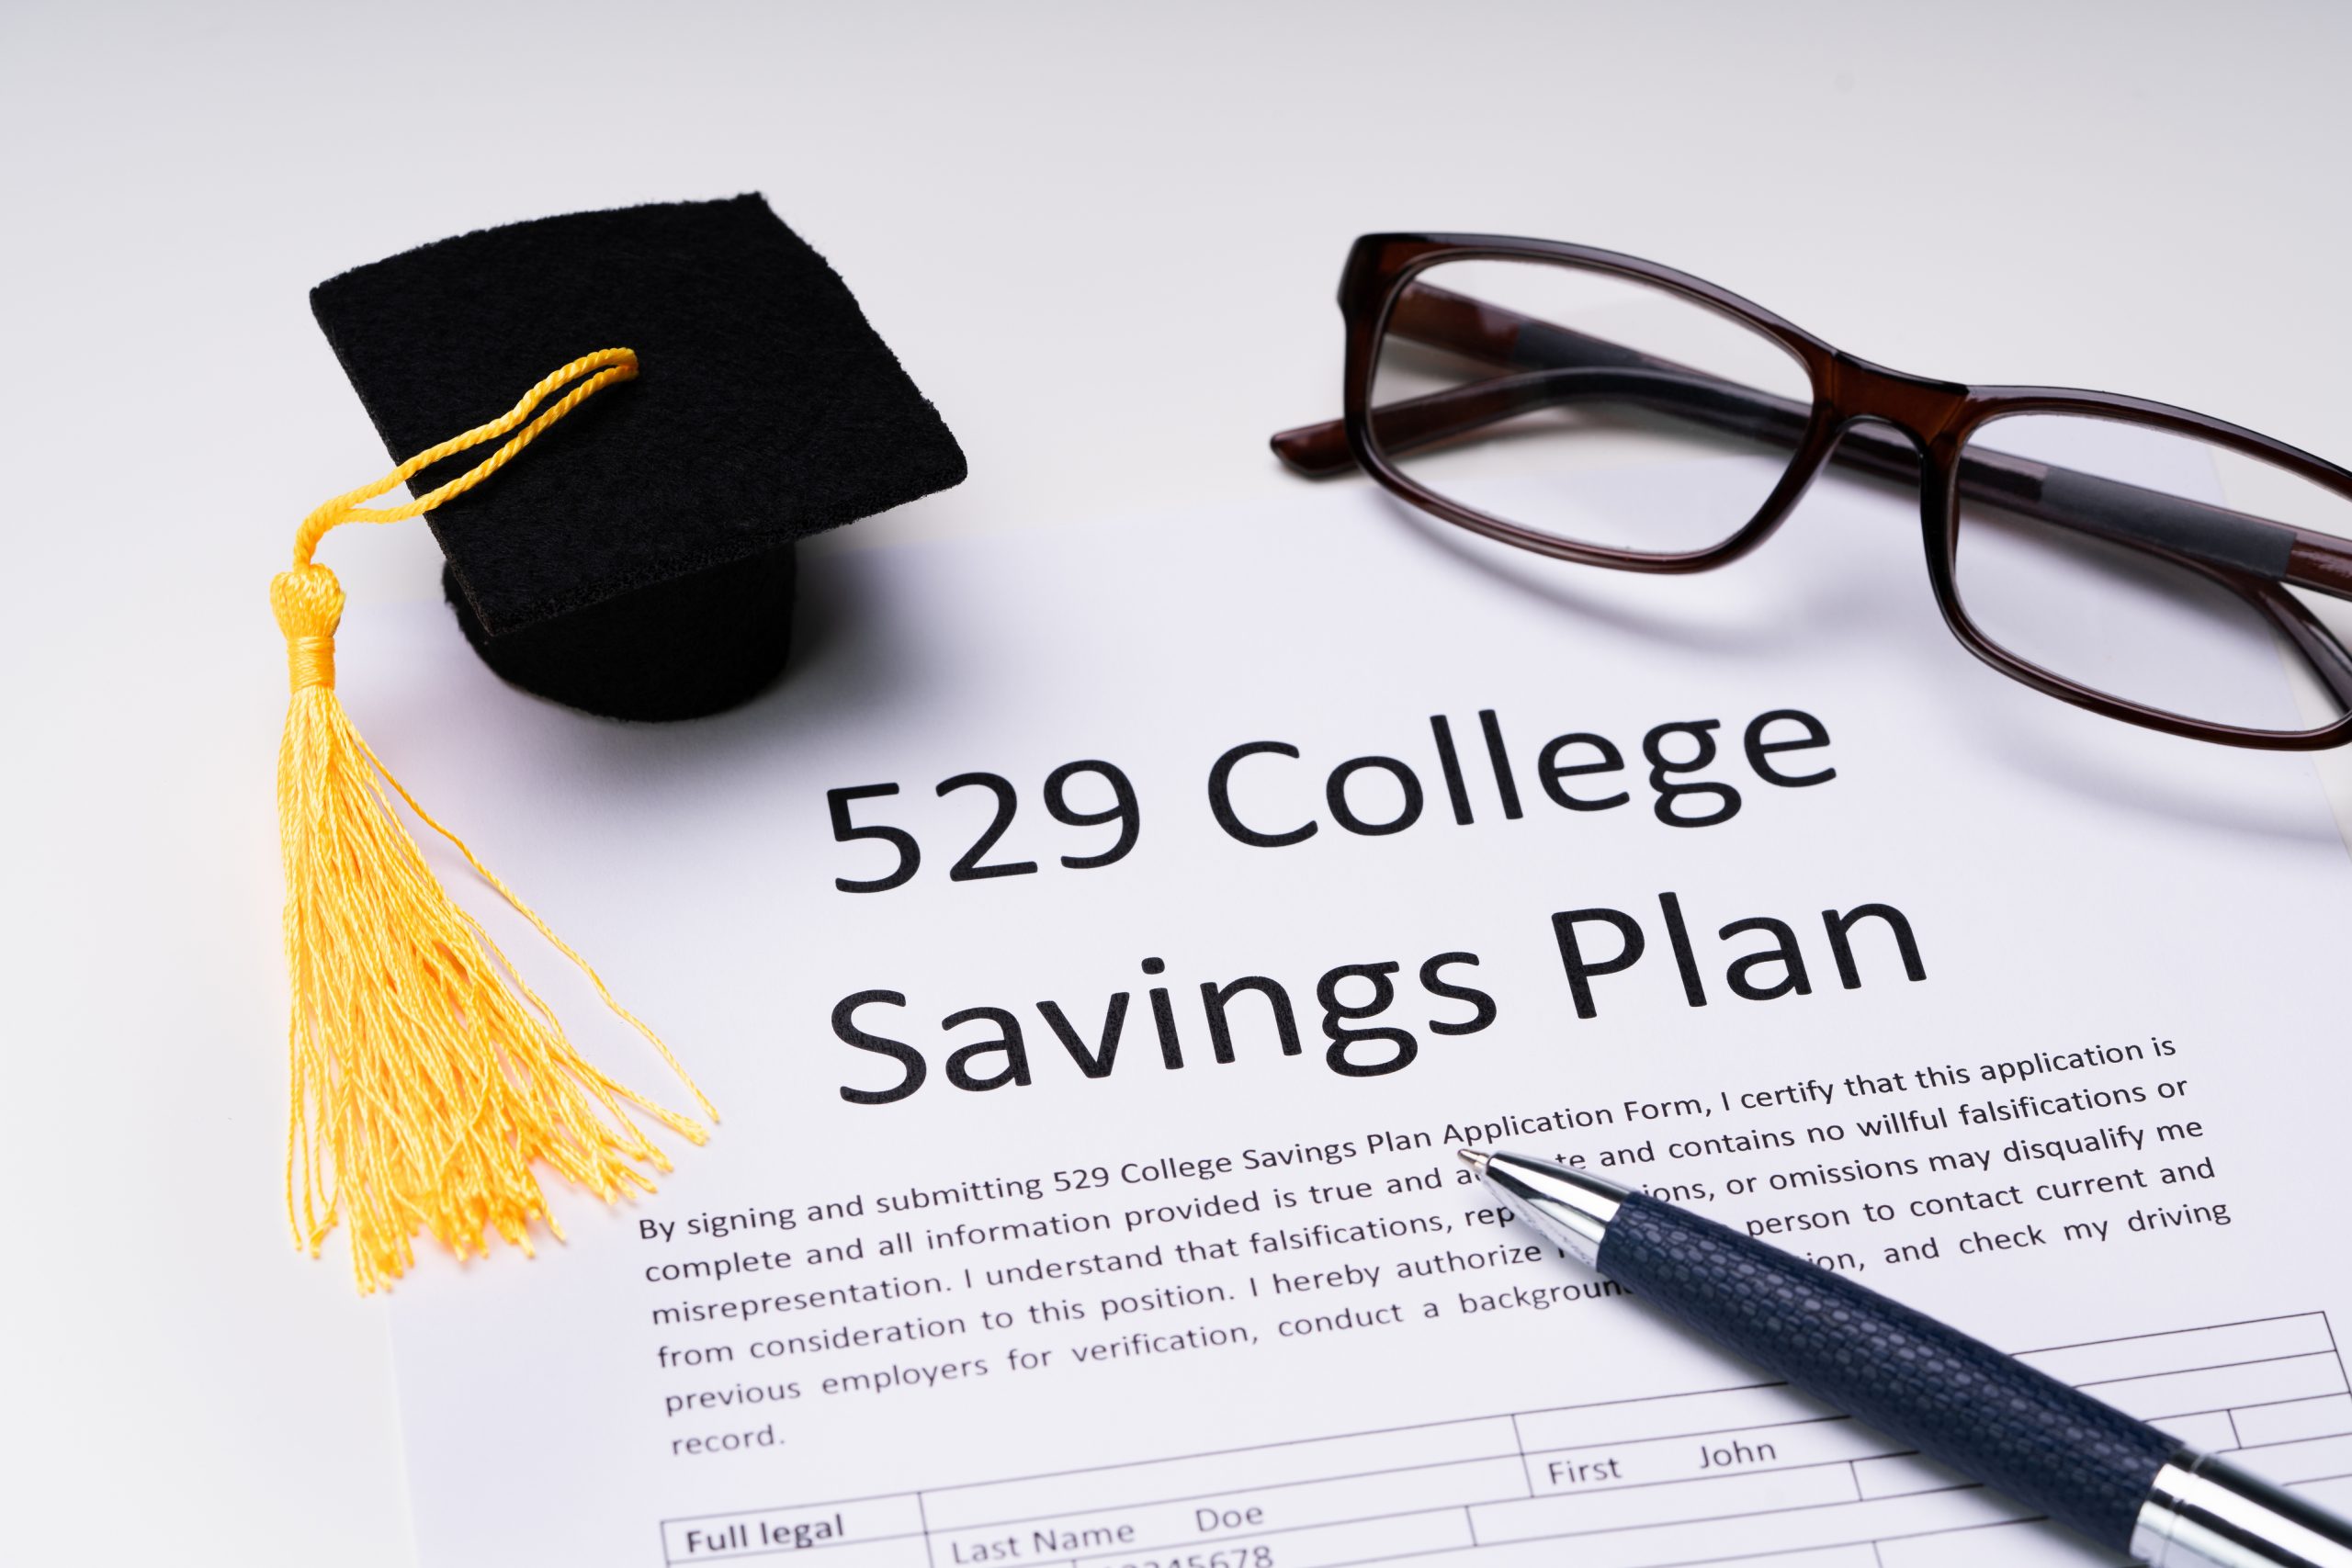 How to Maximize 529 Plans to Pay for Education Expenses (or not)